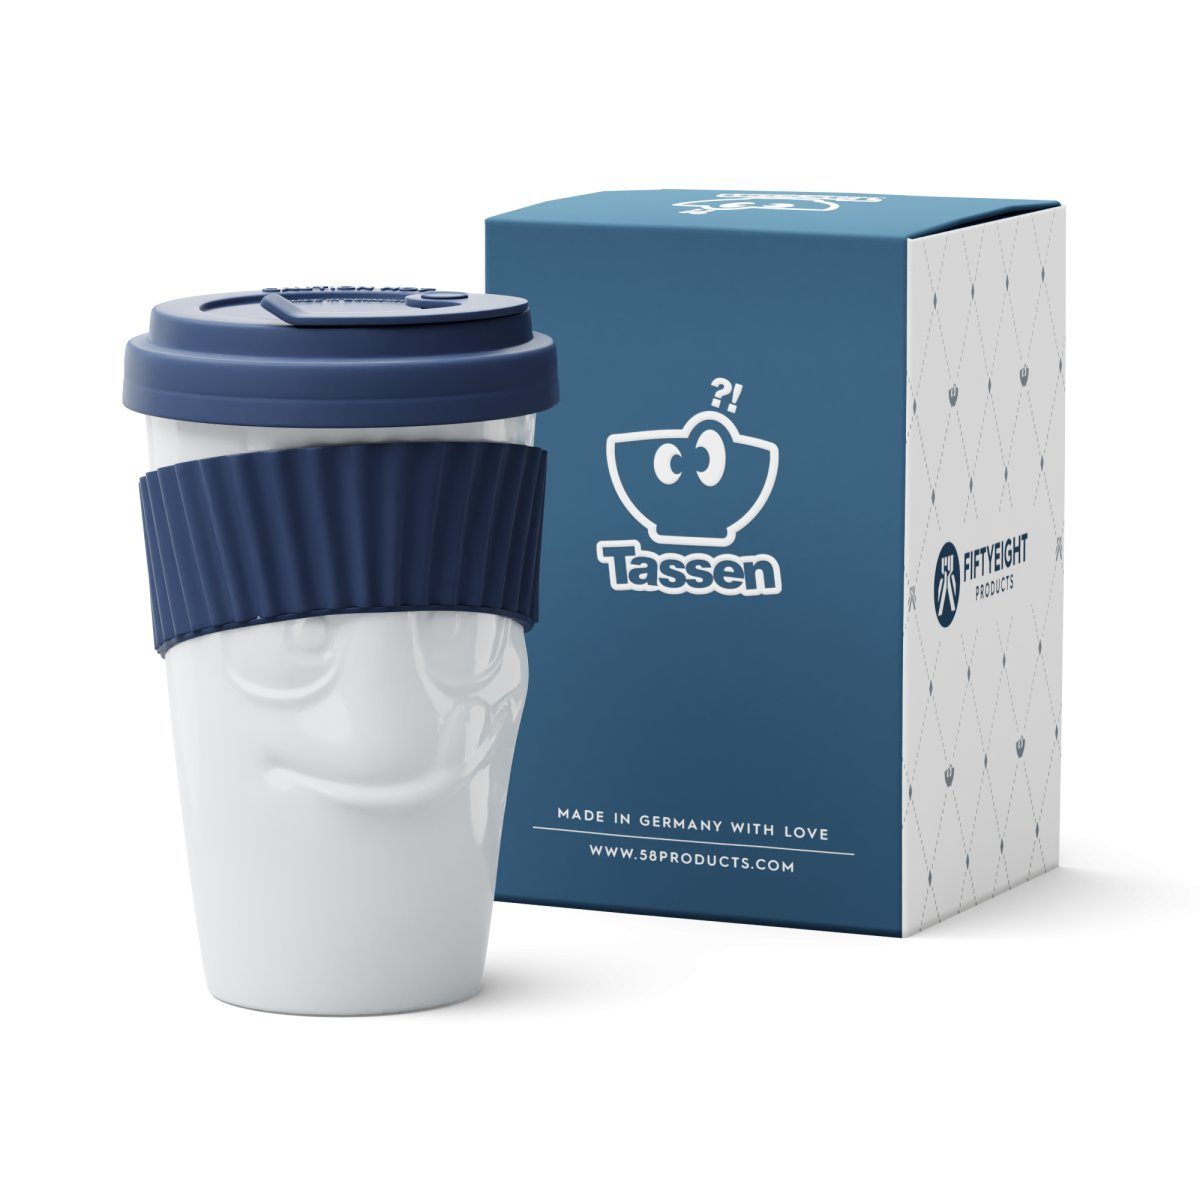 FIFTYEIGHT PRODUCTS Coffee-to-go-Becher 4 x - Becher Lecker Farben Becher - To Go Go To 4